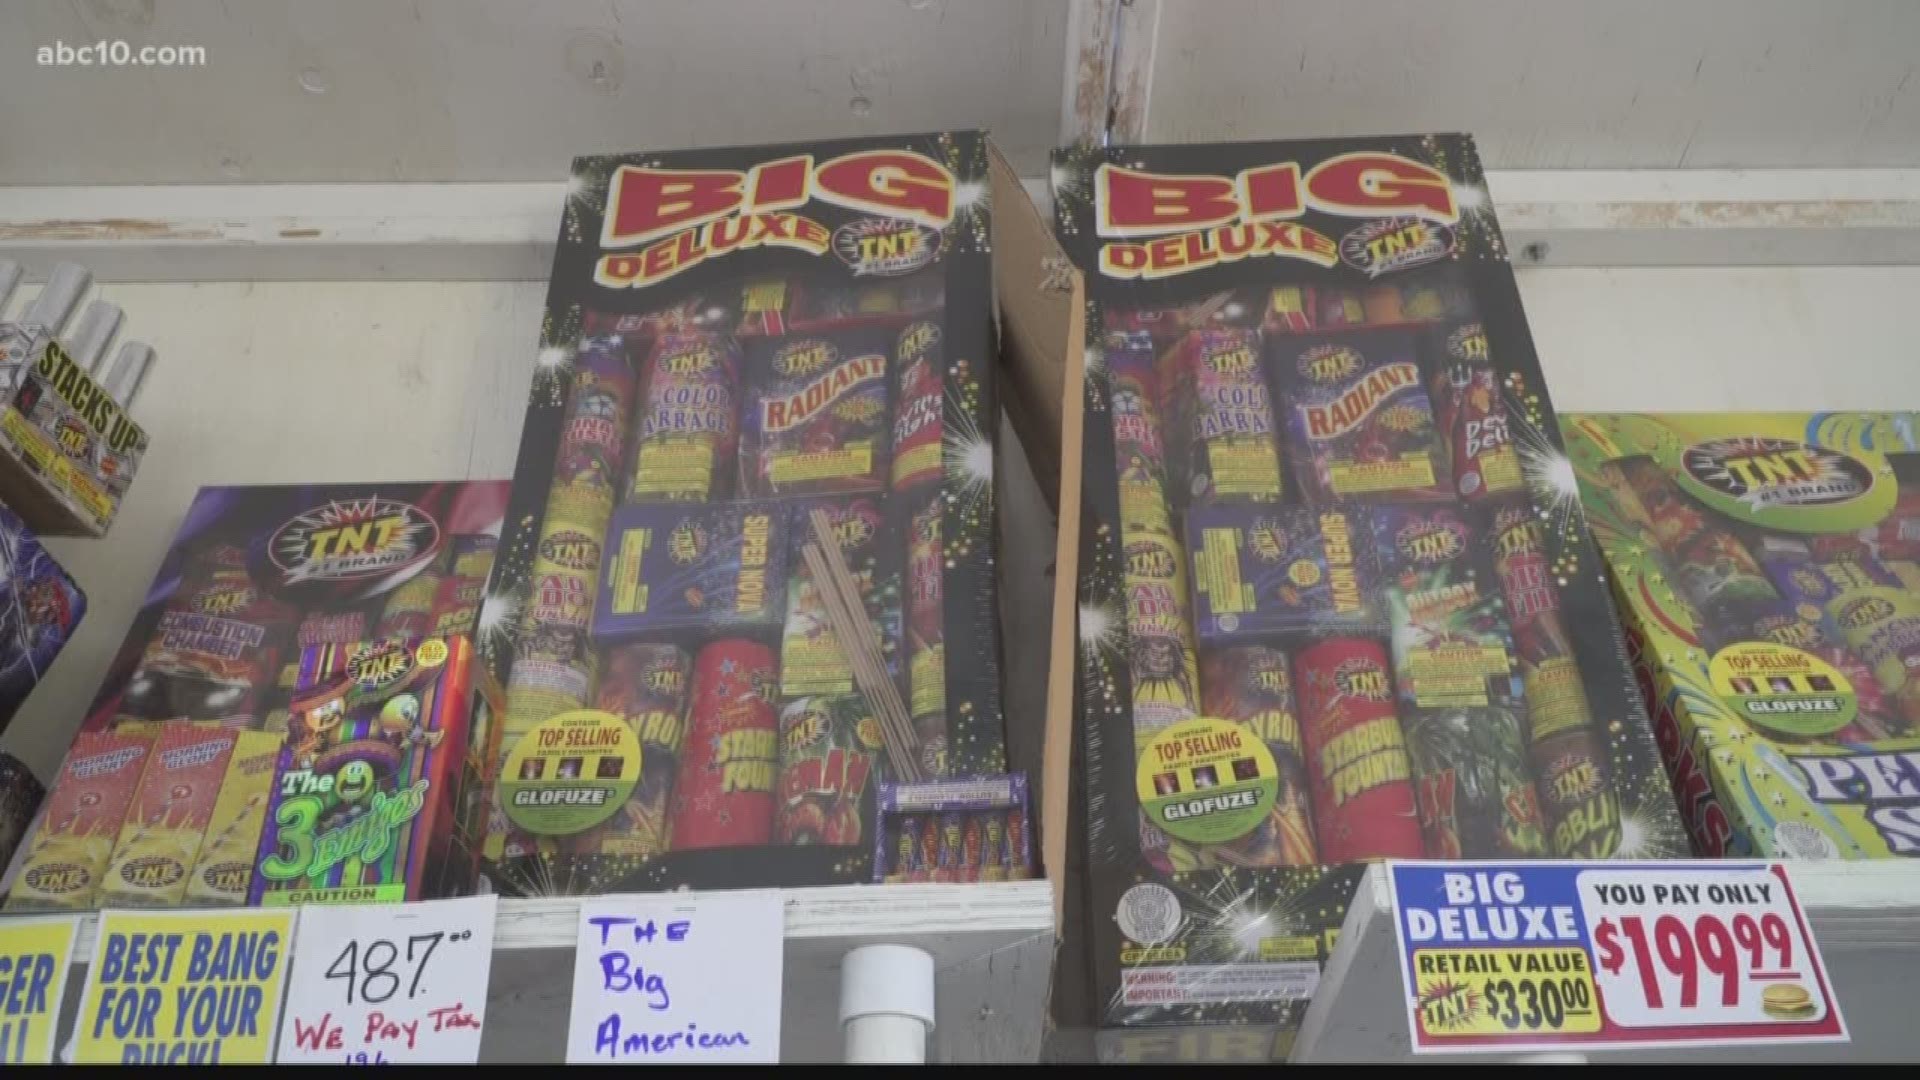 Fireworks booths will be open for business in Sacramento on Thursday -- play it safe and know the rules of what is and isn't allowed.